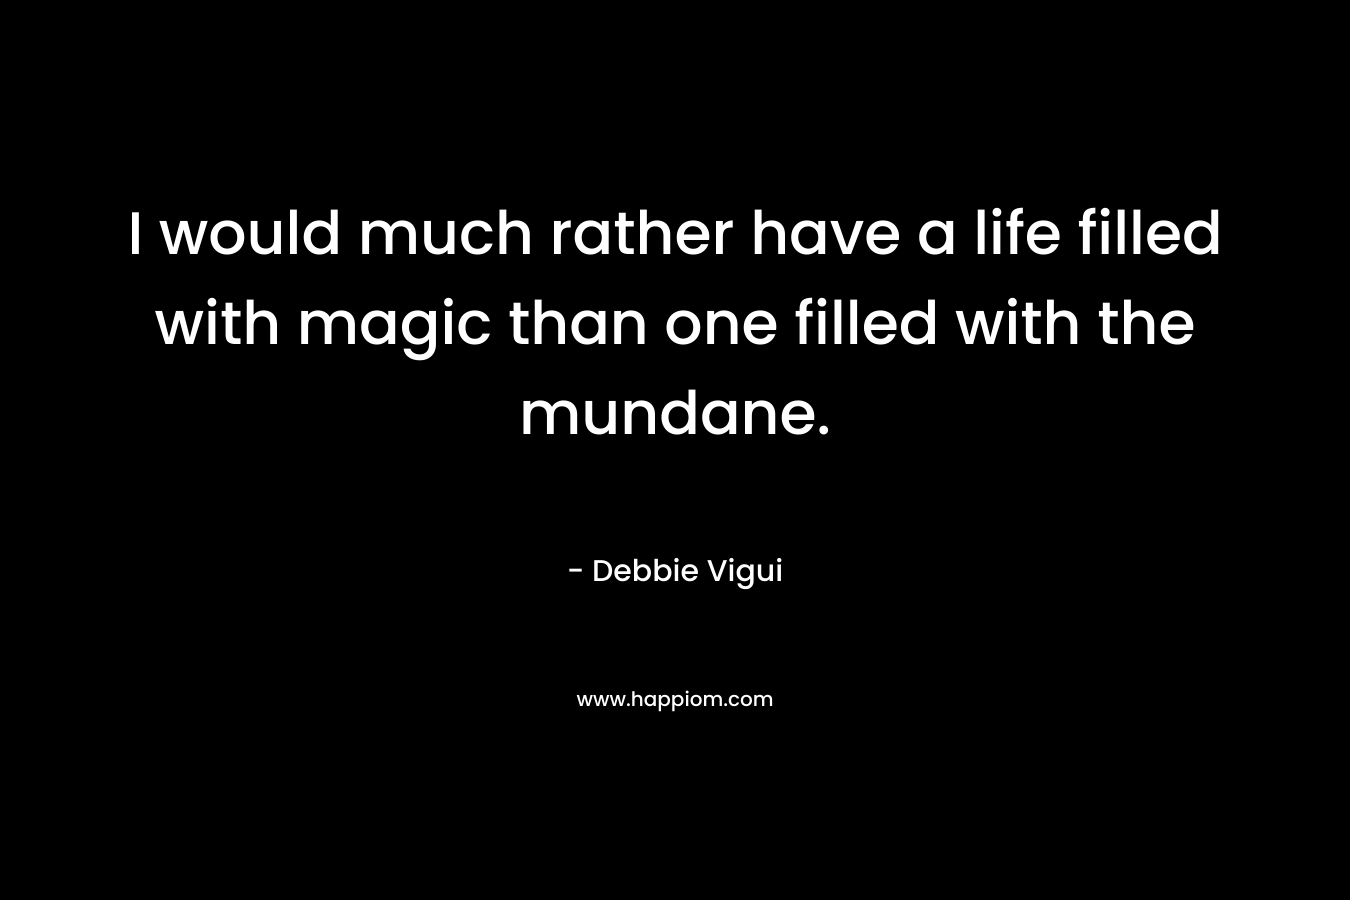 I would much rather have a life filled with magic than one filled with the mundane.